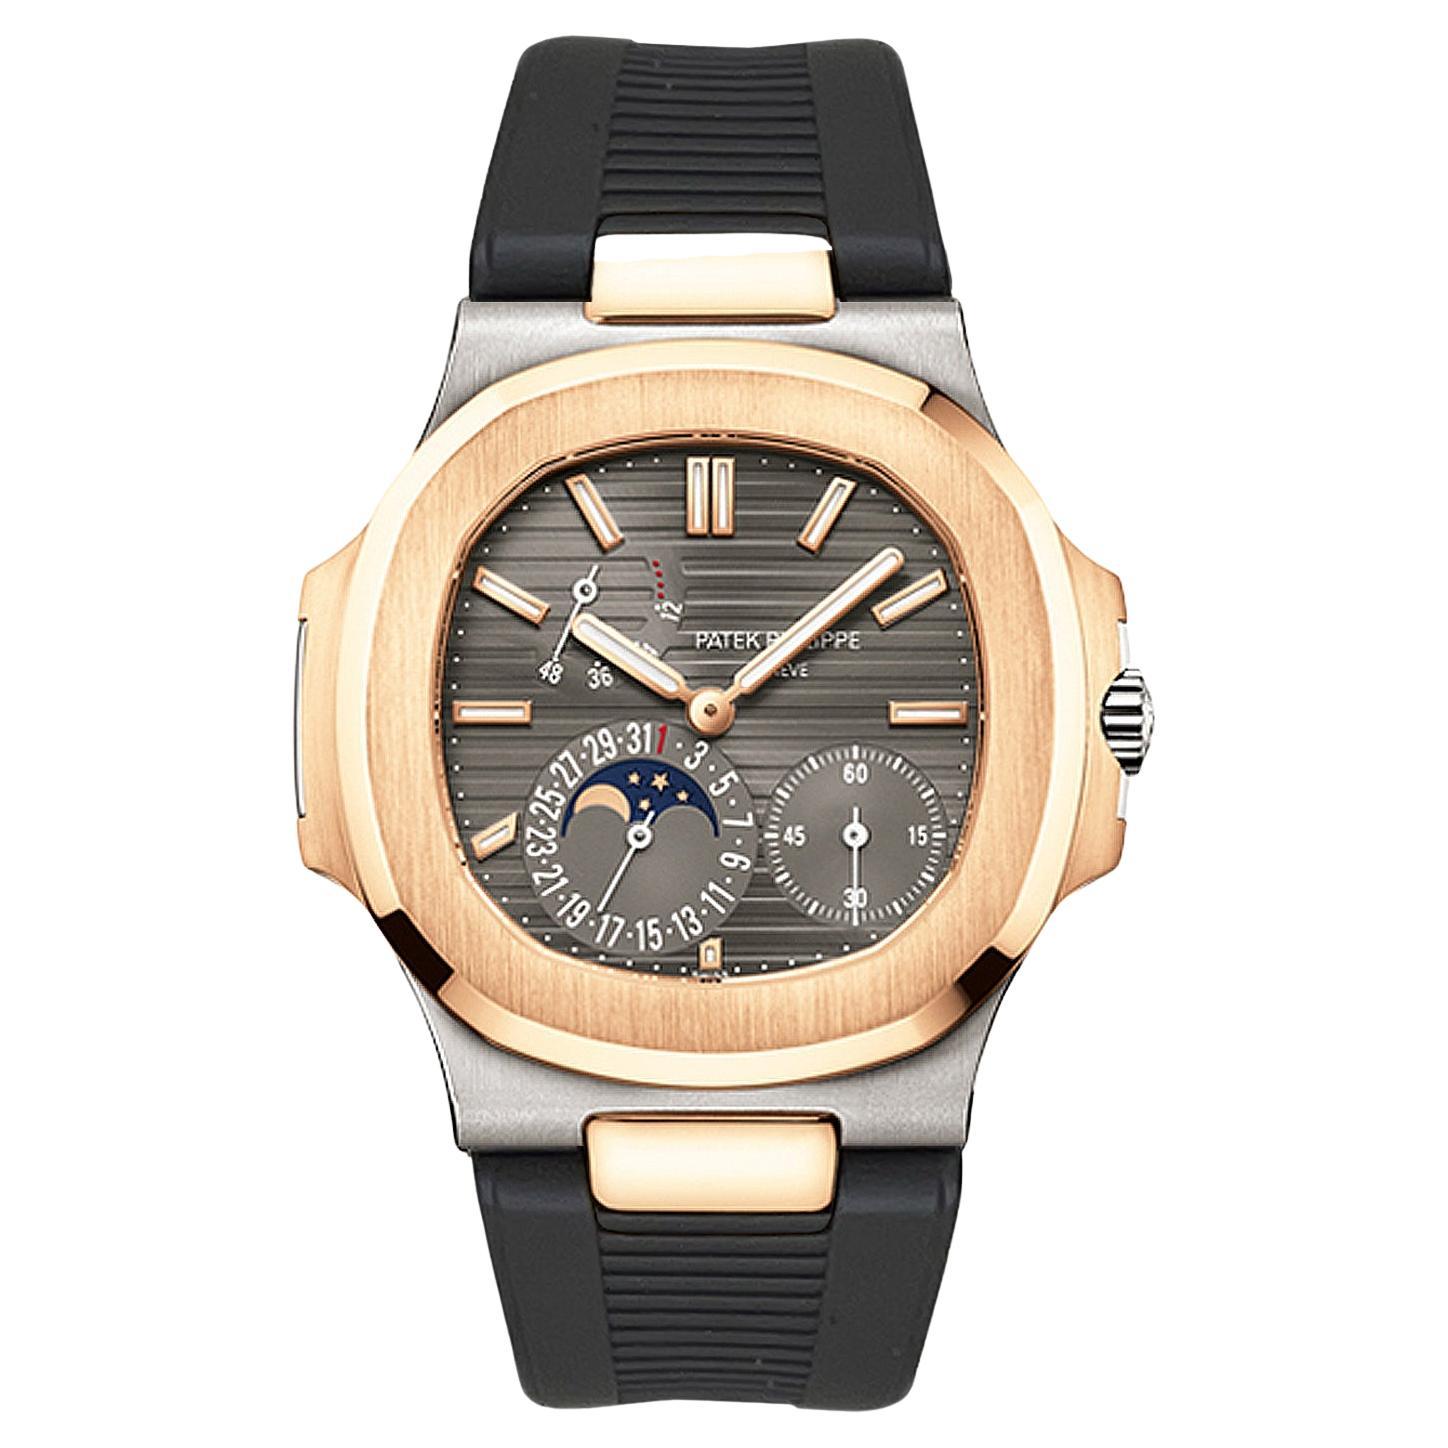 How long does it take to make a Patek Philippe?